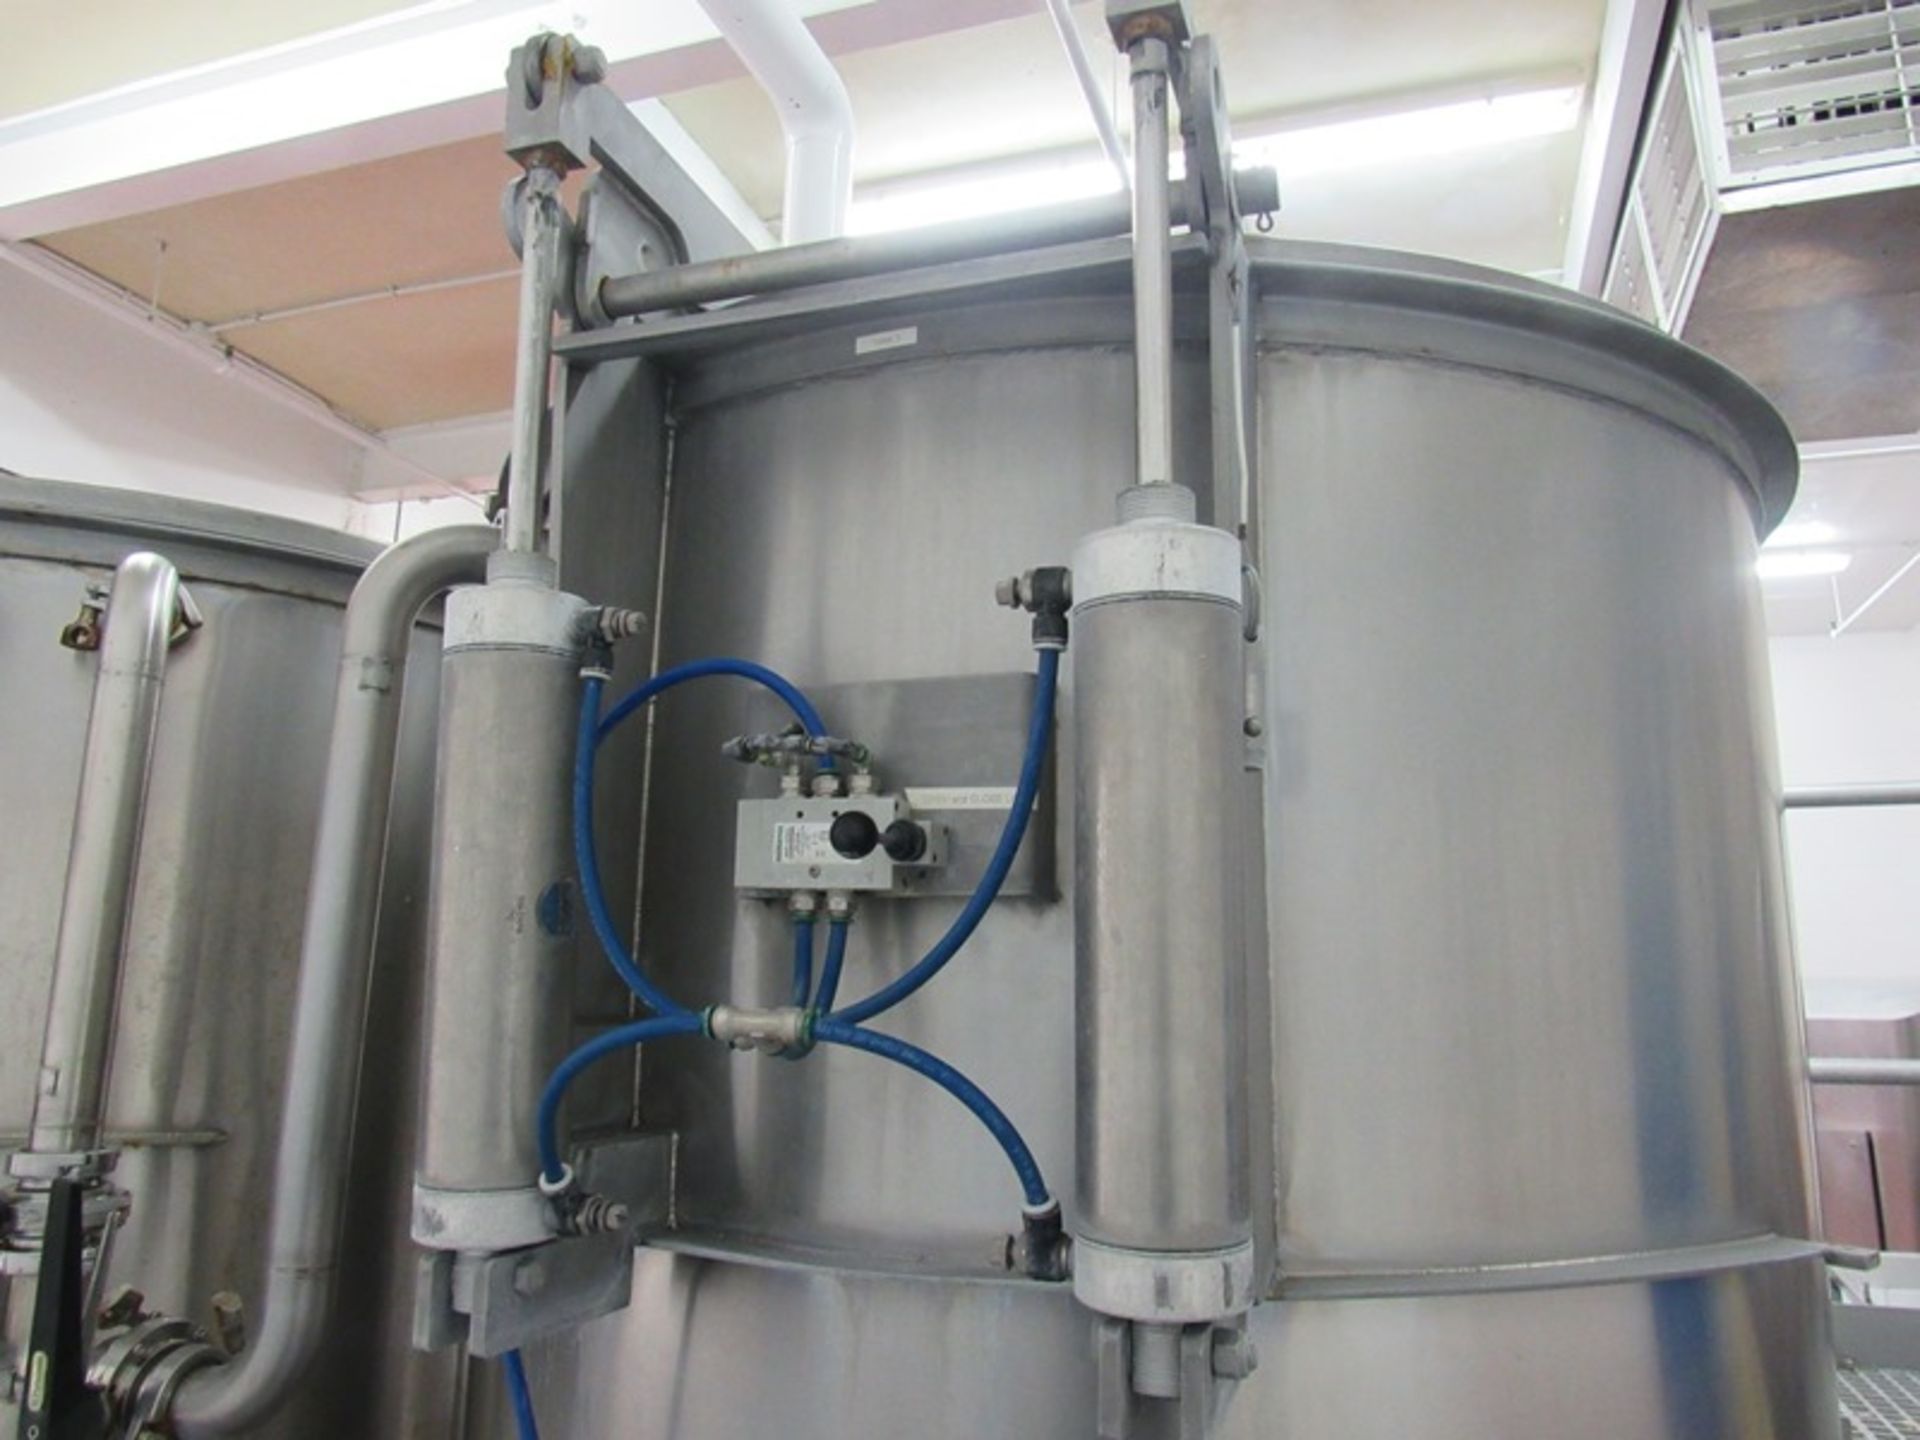 Dual Stainless Steel Mix Tank System Tanks, 46" Dia. X 43" Deep on stainless steel stand, - Image 6 of 10